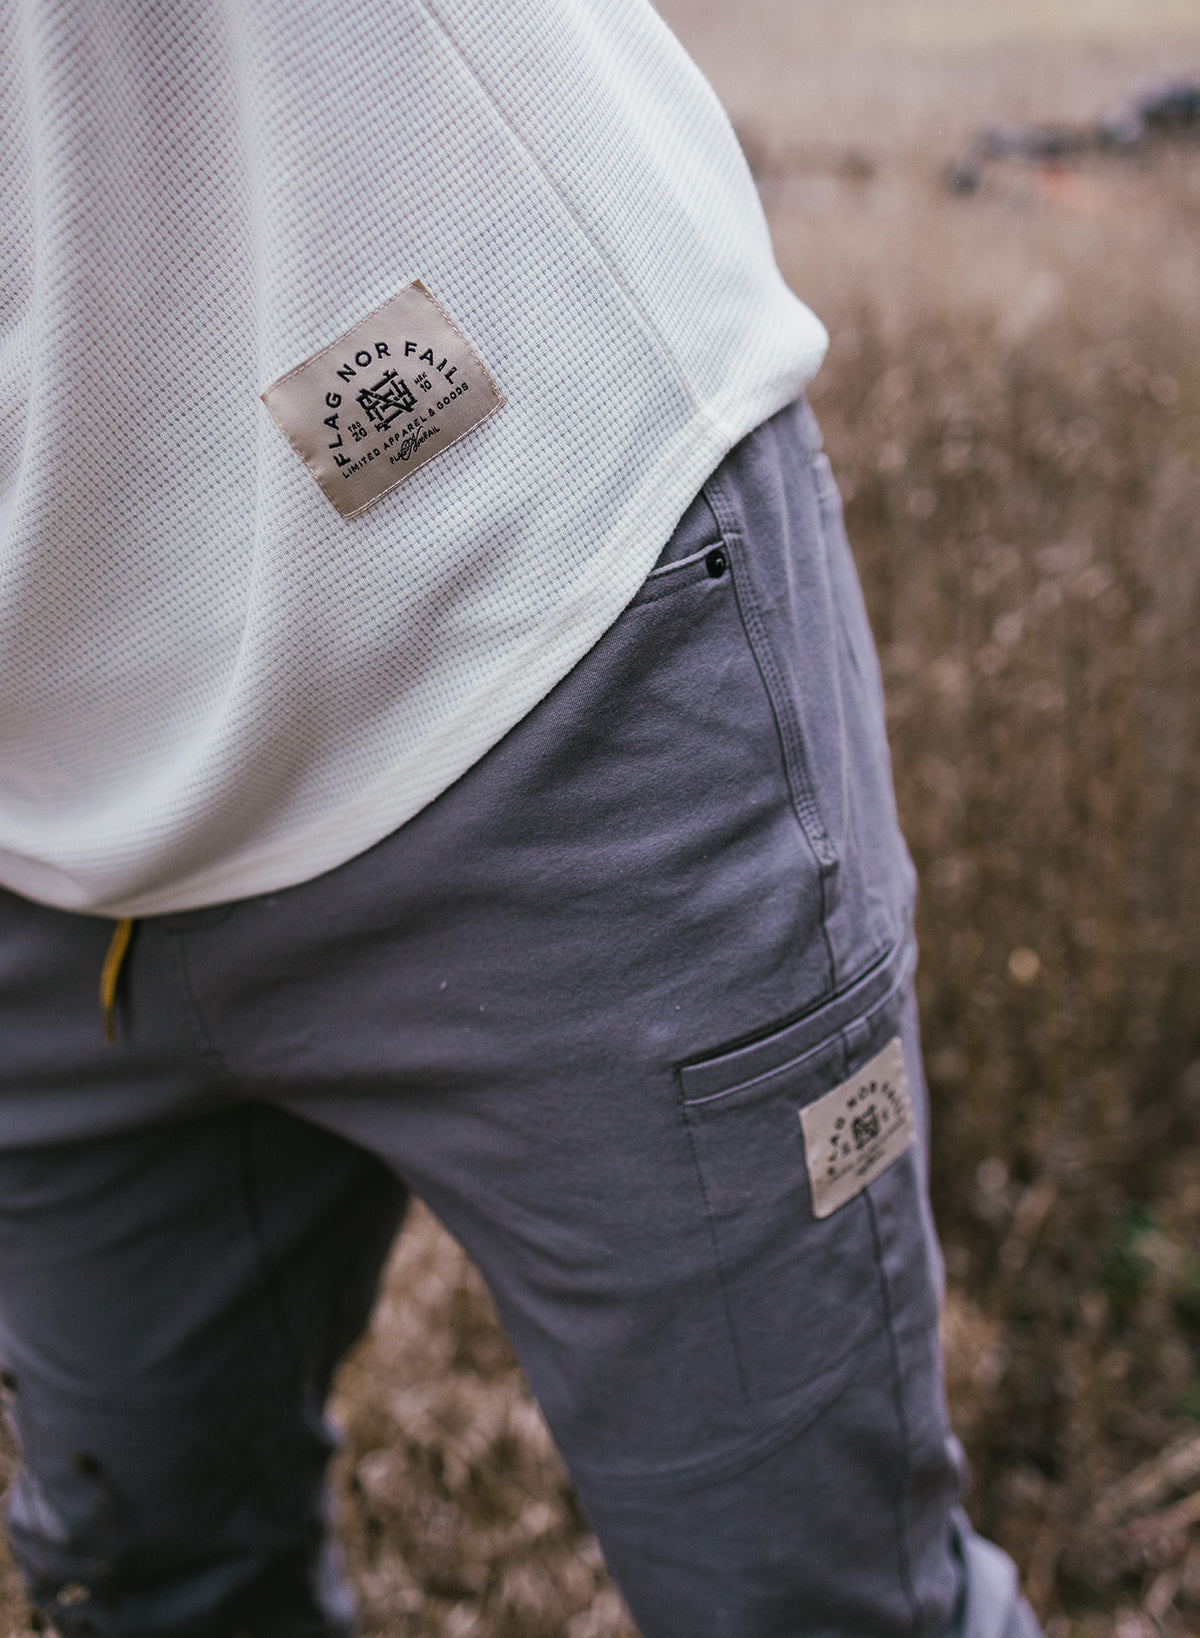 FOREVER JOGGERS - GREY